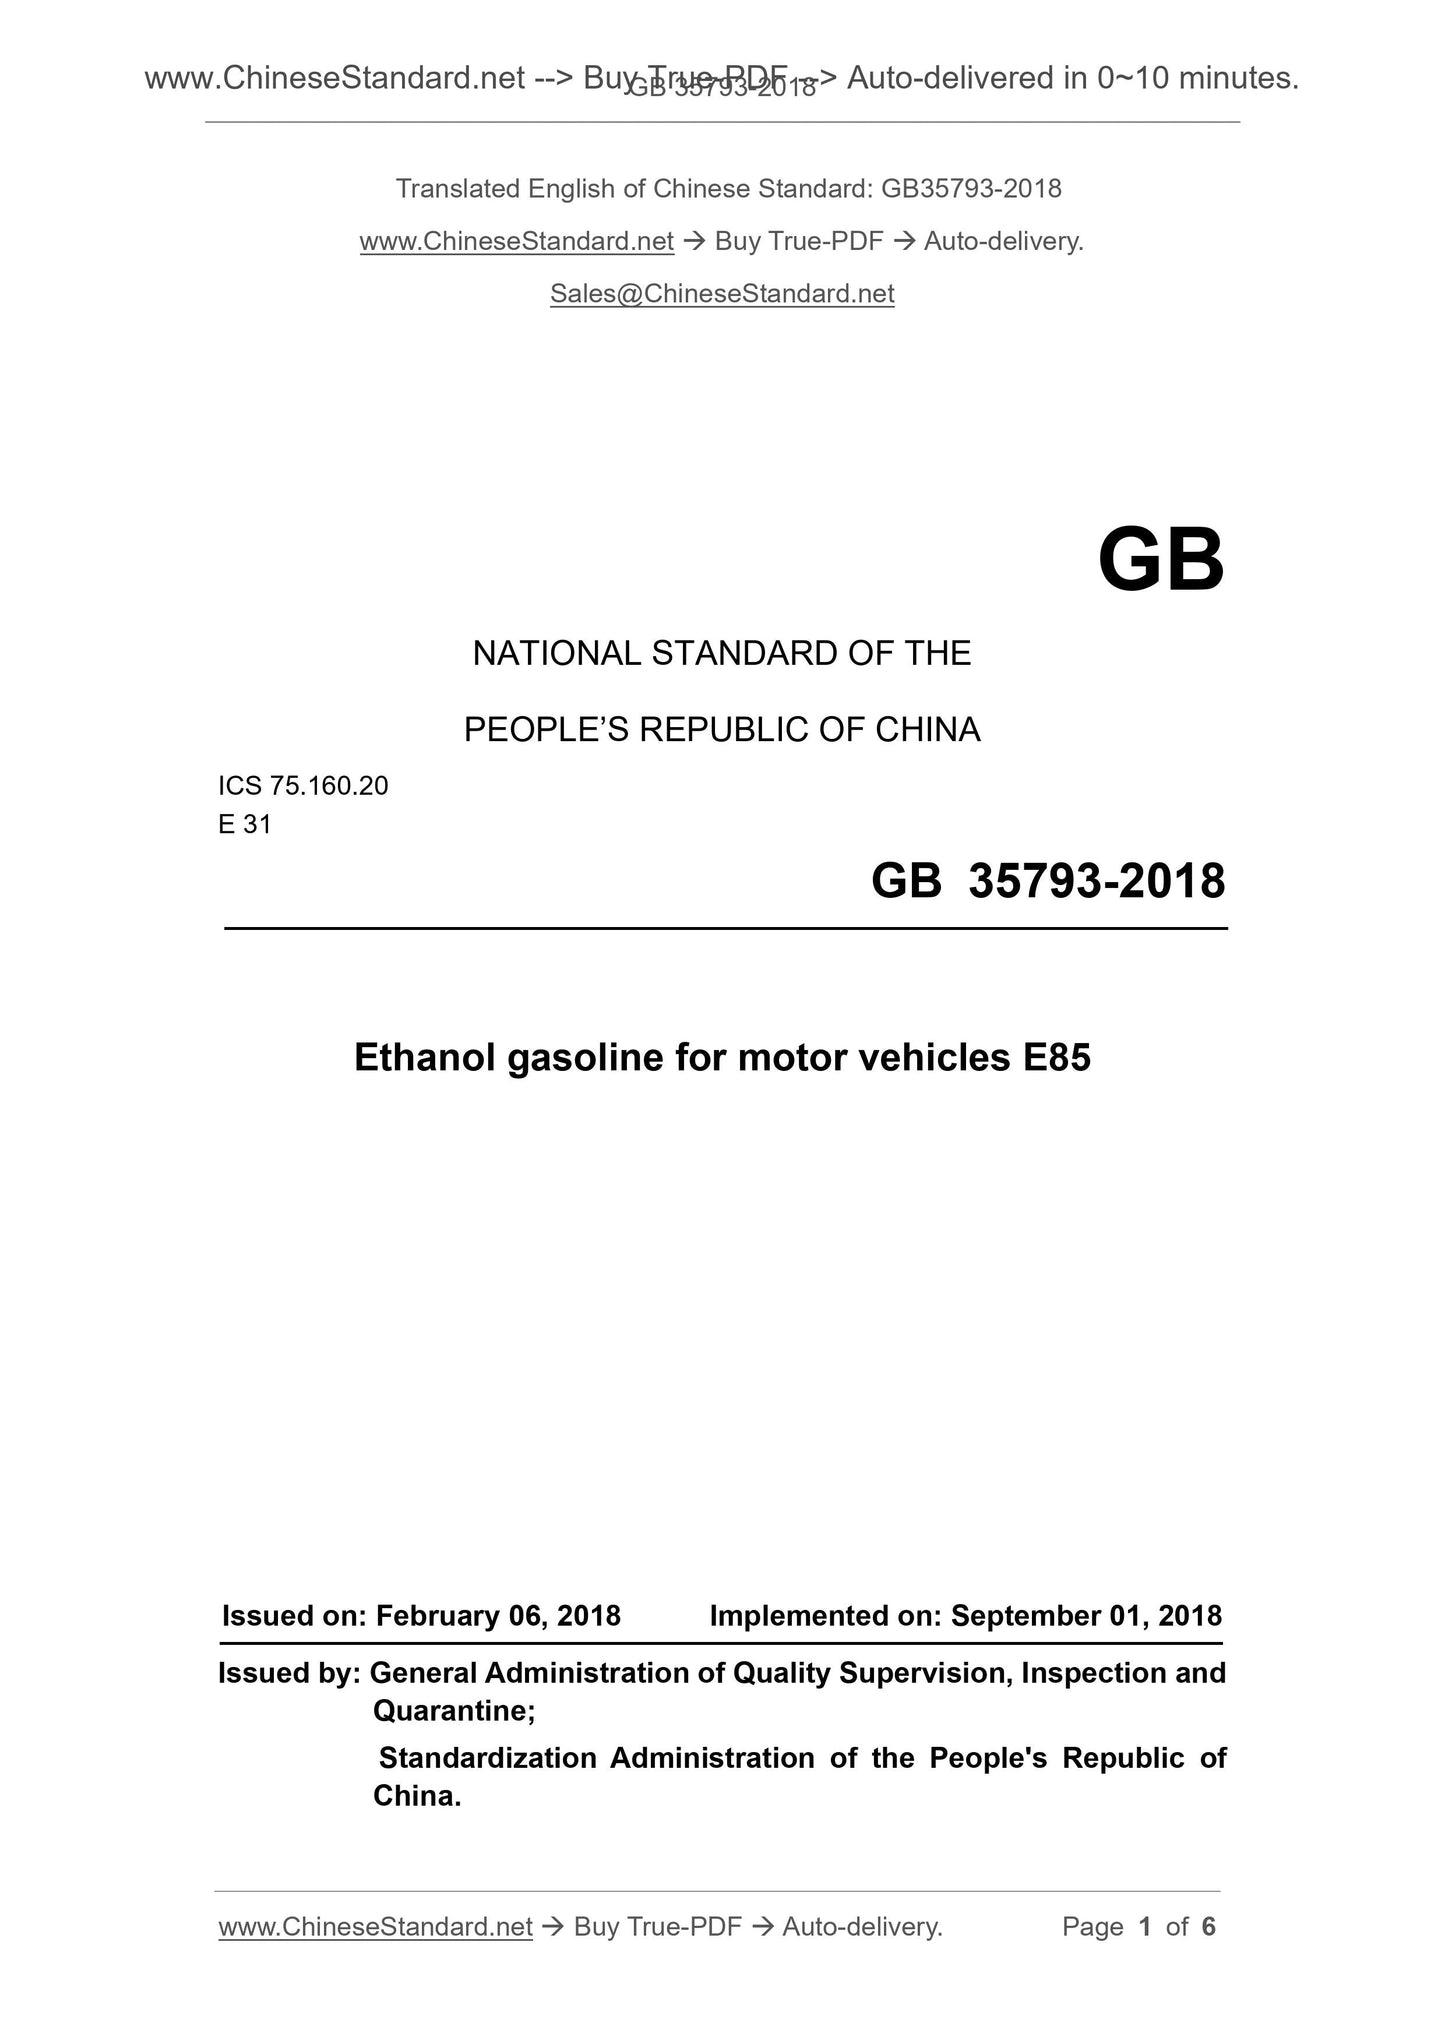 GB 35793-2018 Page 1